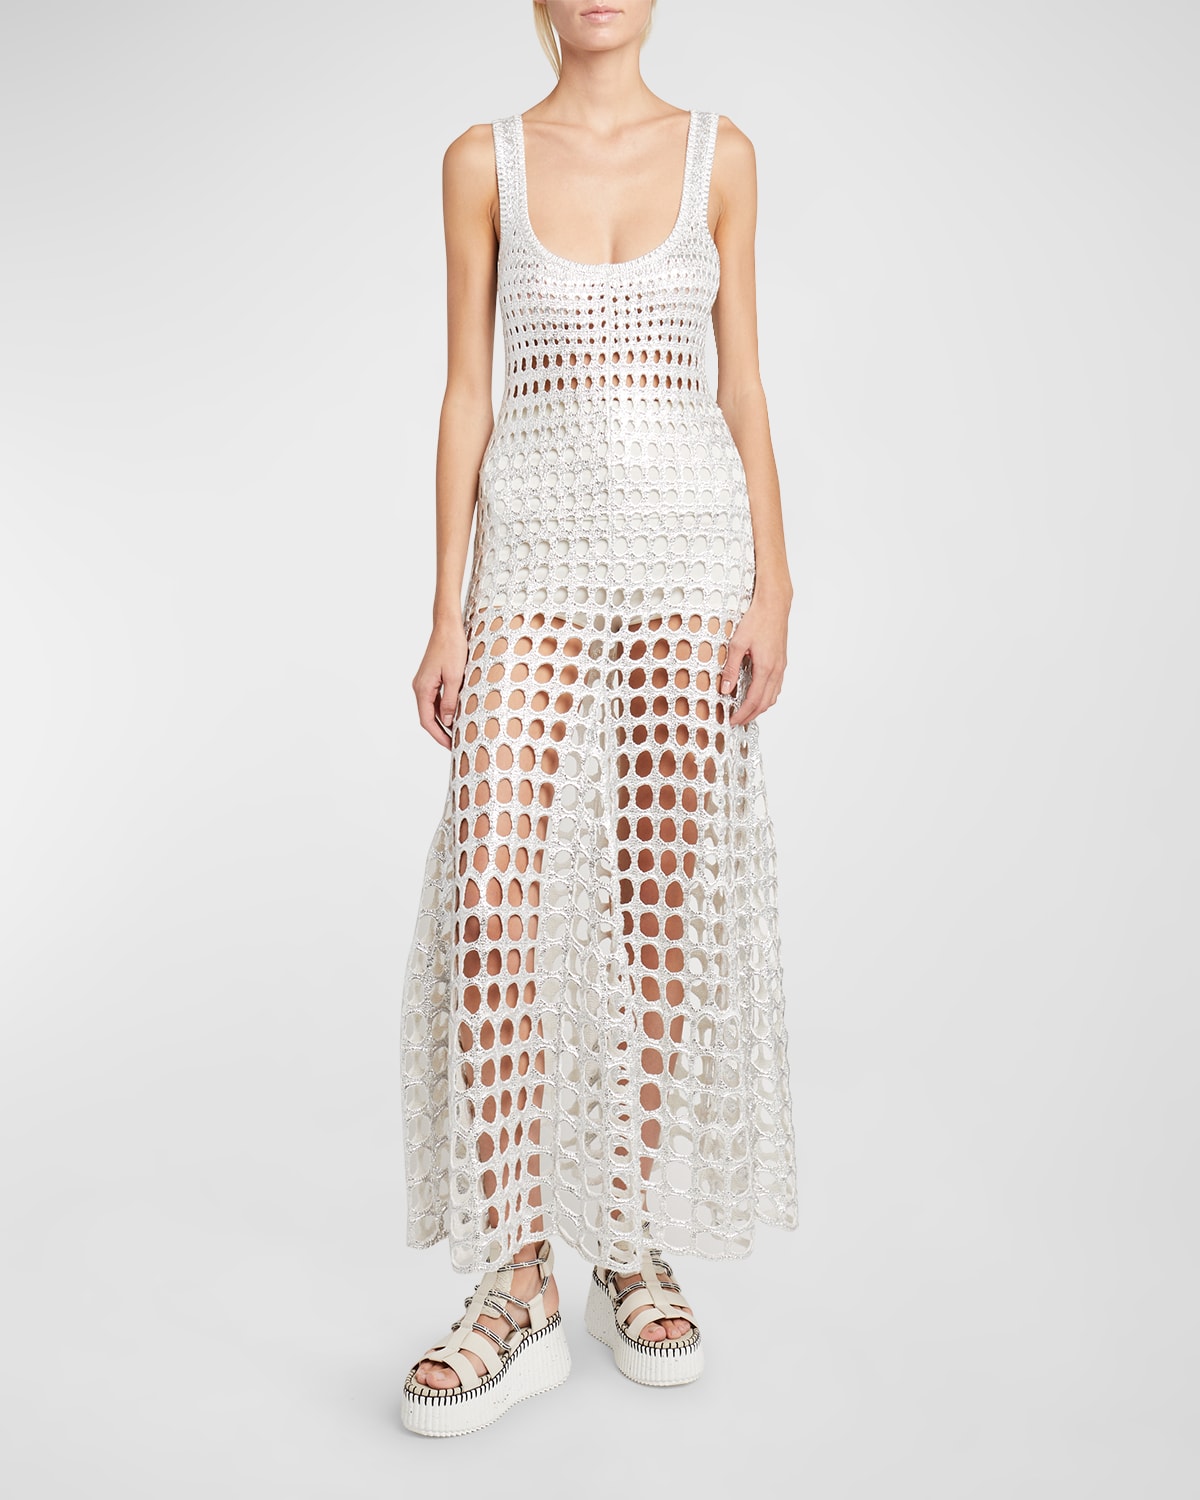 CHLOÉ SILVER MACRAME MAXI DRESS WITH LACE-UP BACK